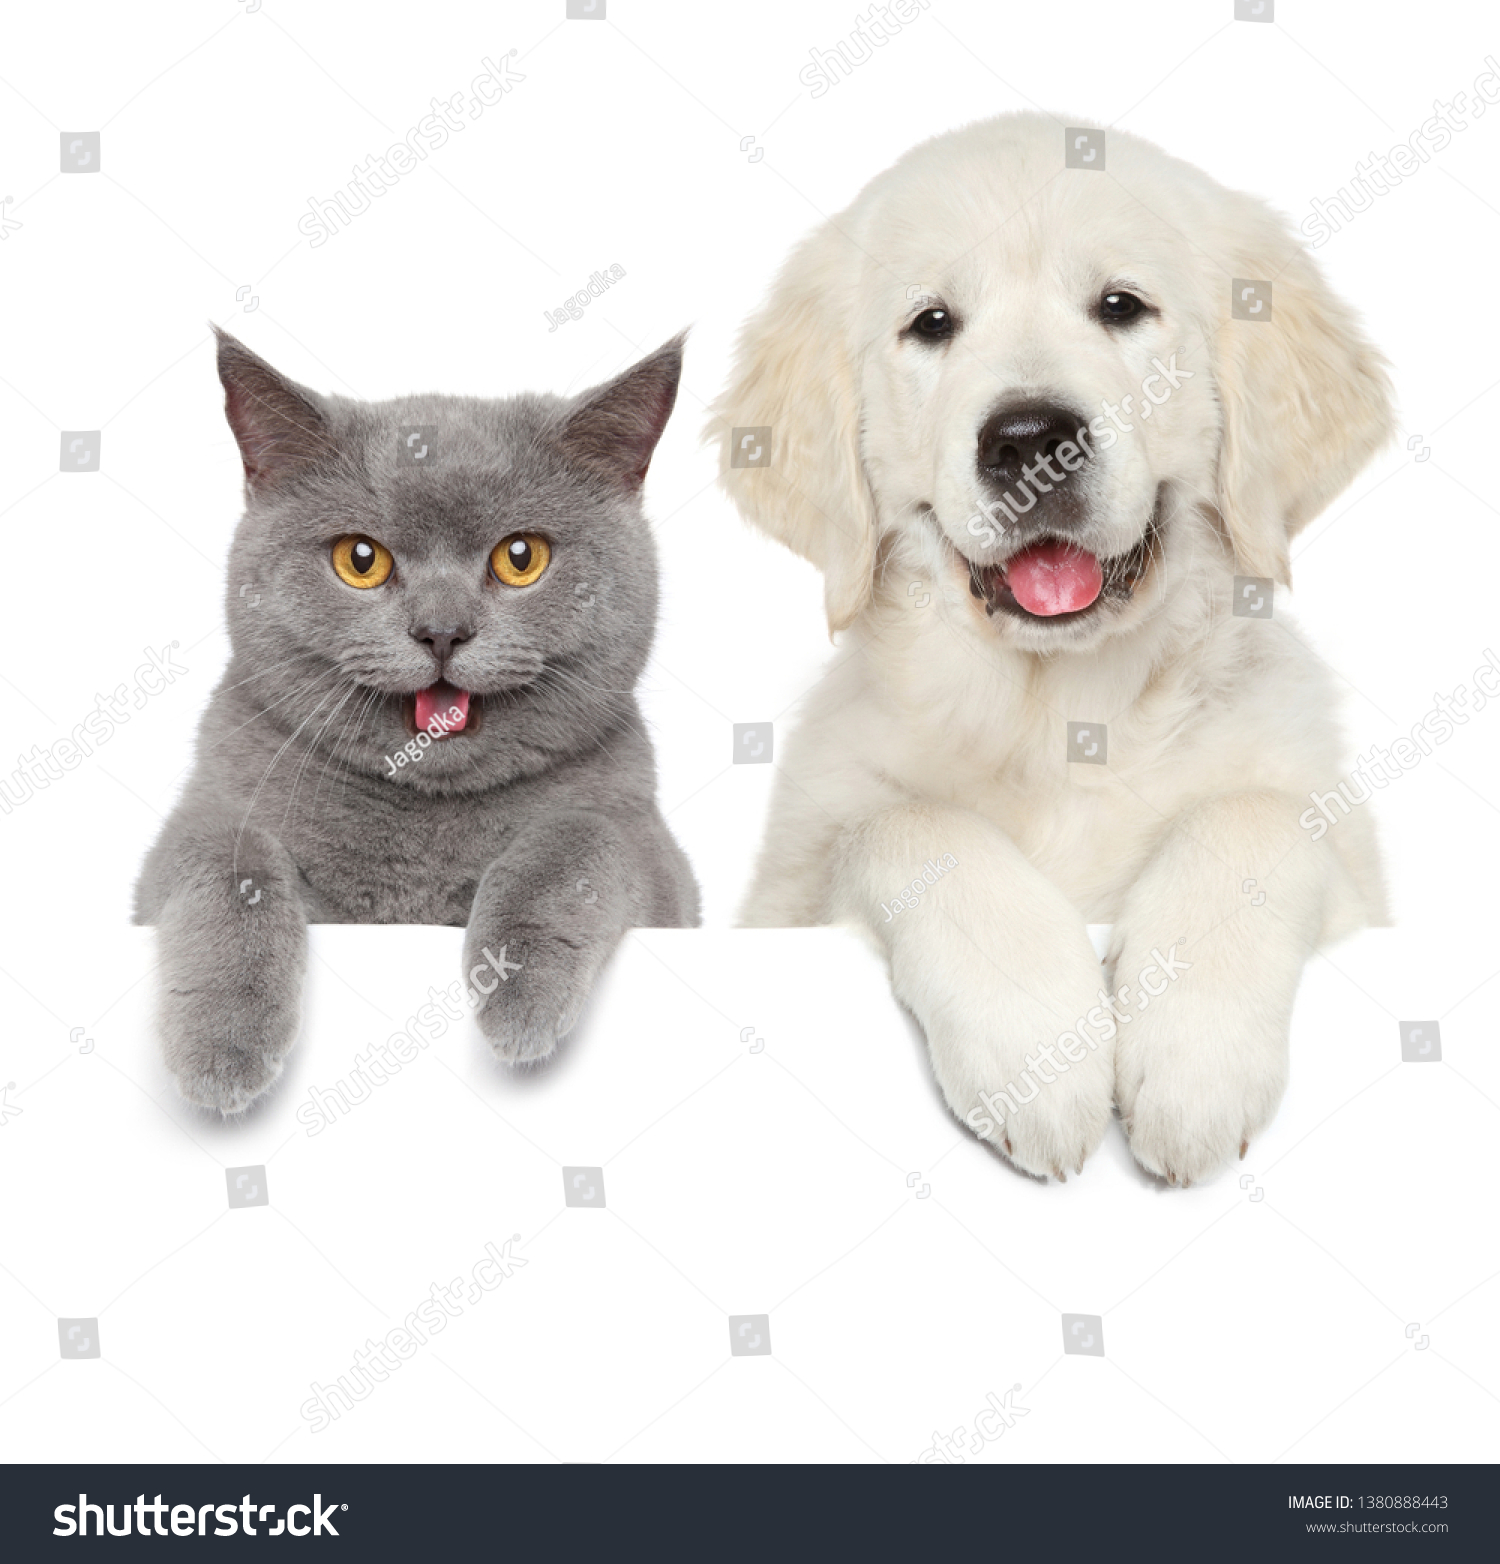 Cat and dog over white banner. Animal themes #1380888443